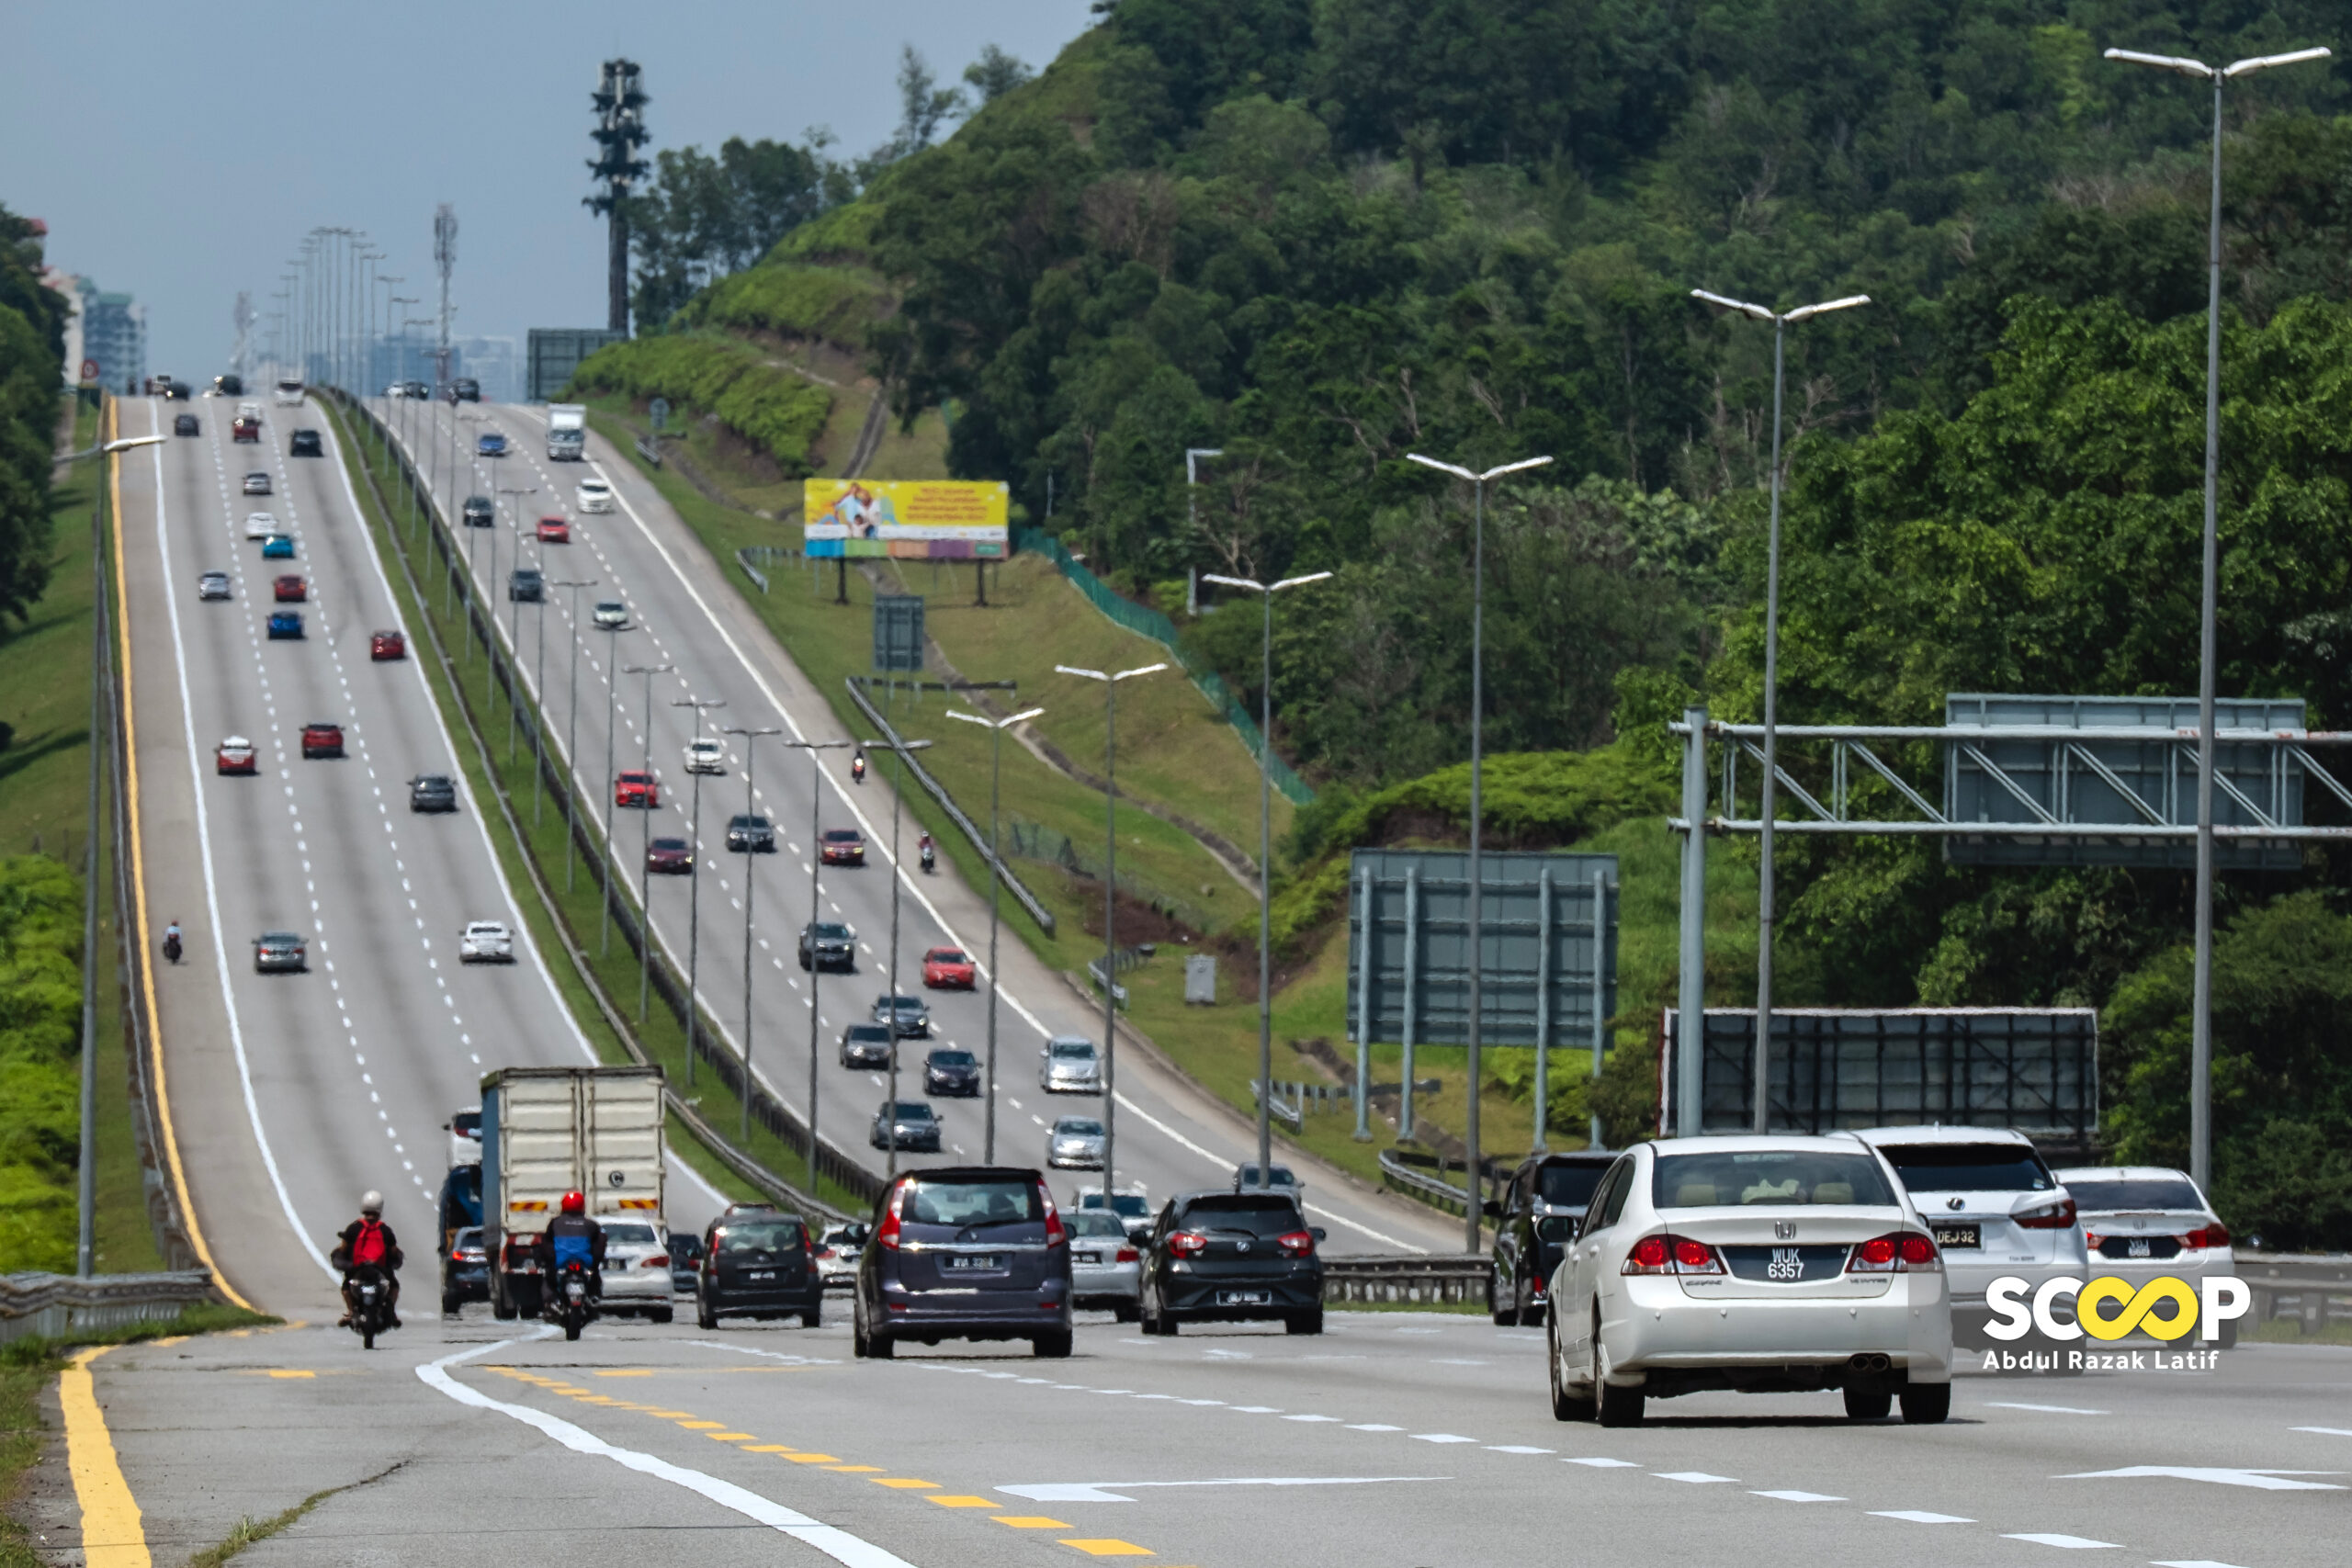 Just in time for Hari Raya, motorists can expect toll free highways on April 8 and 9